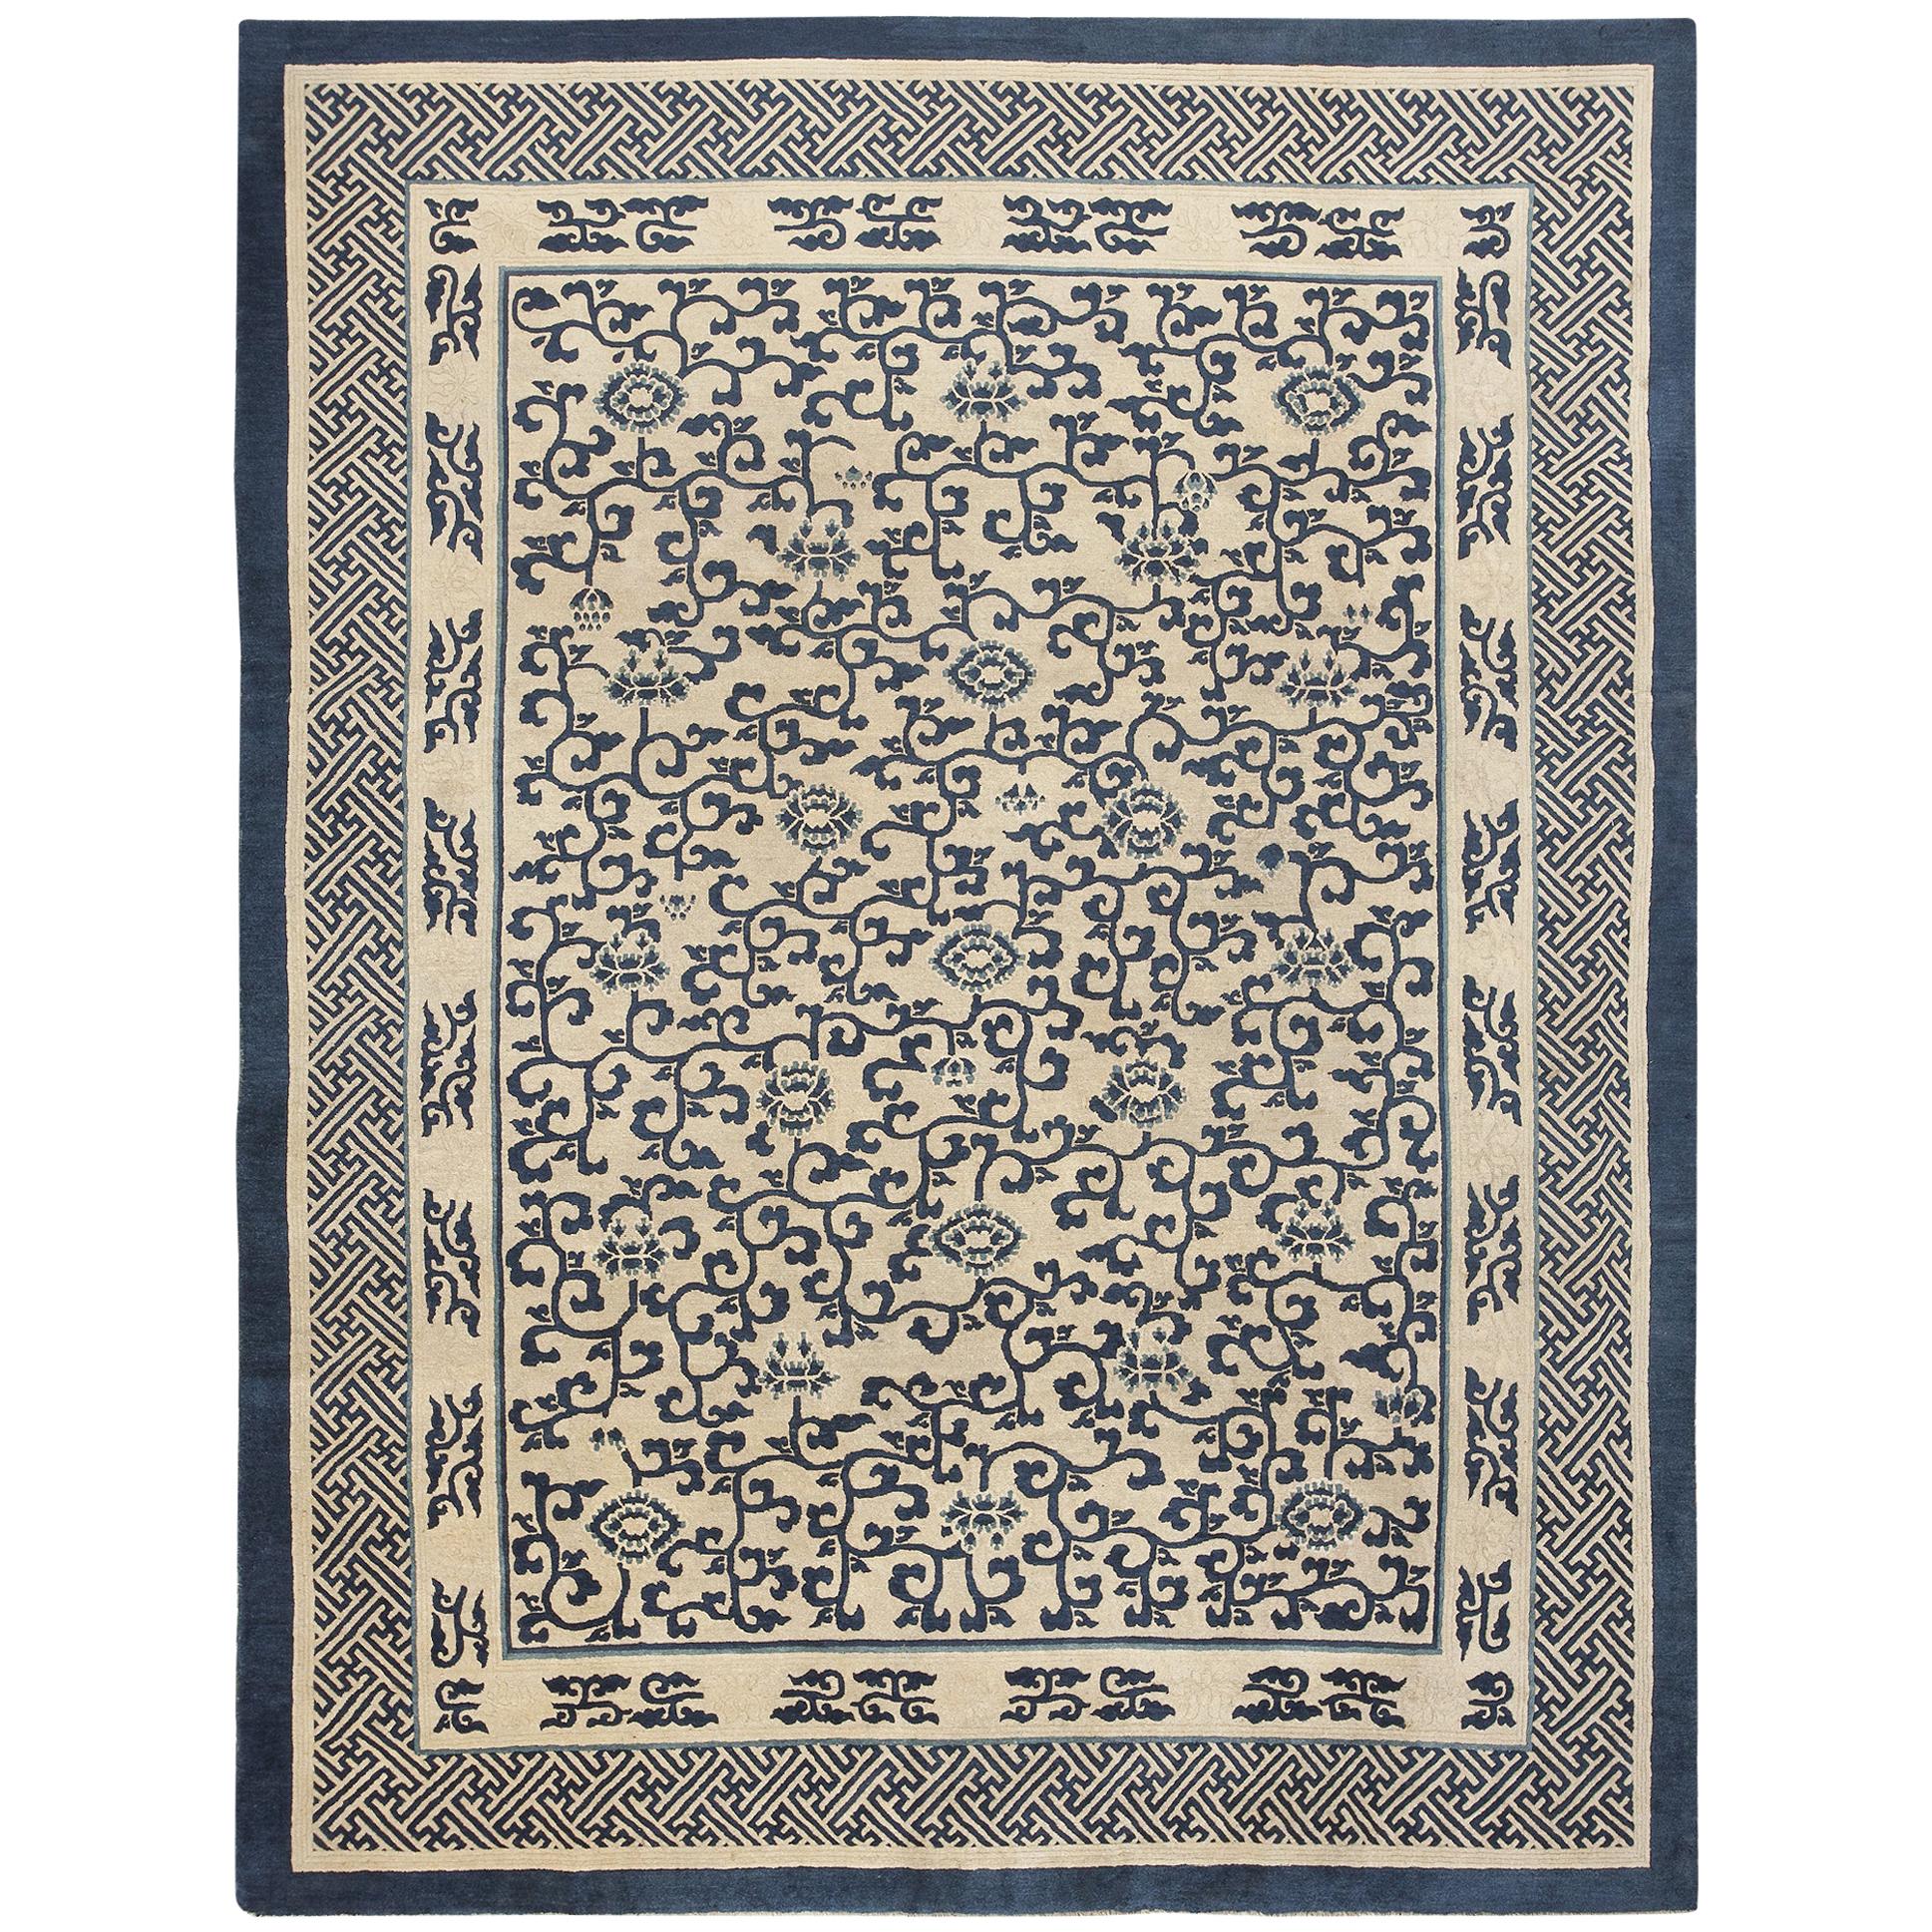 Nazmiyal Collection Antique Chinese Rug. Size: 8 ft 10 in x 11 ft 6 in 